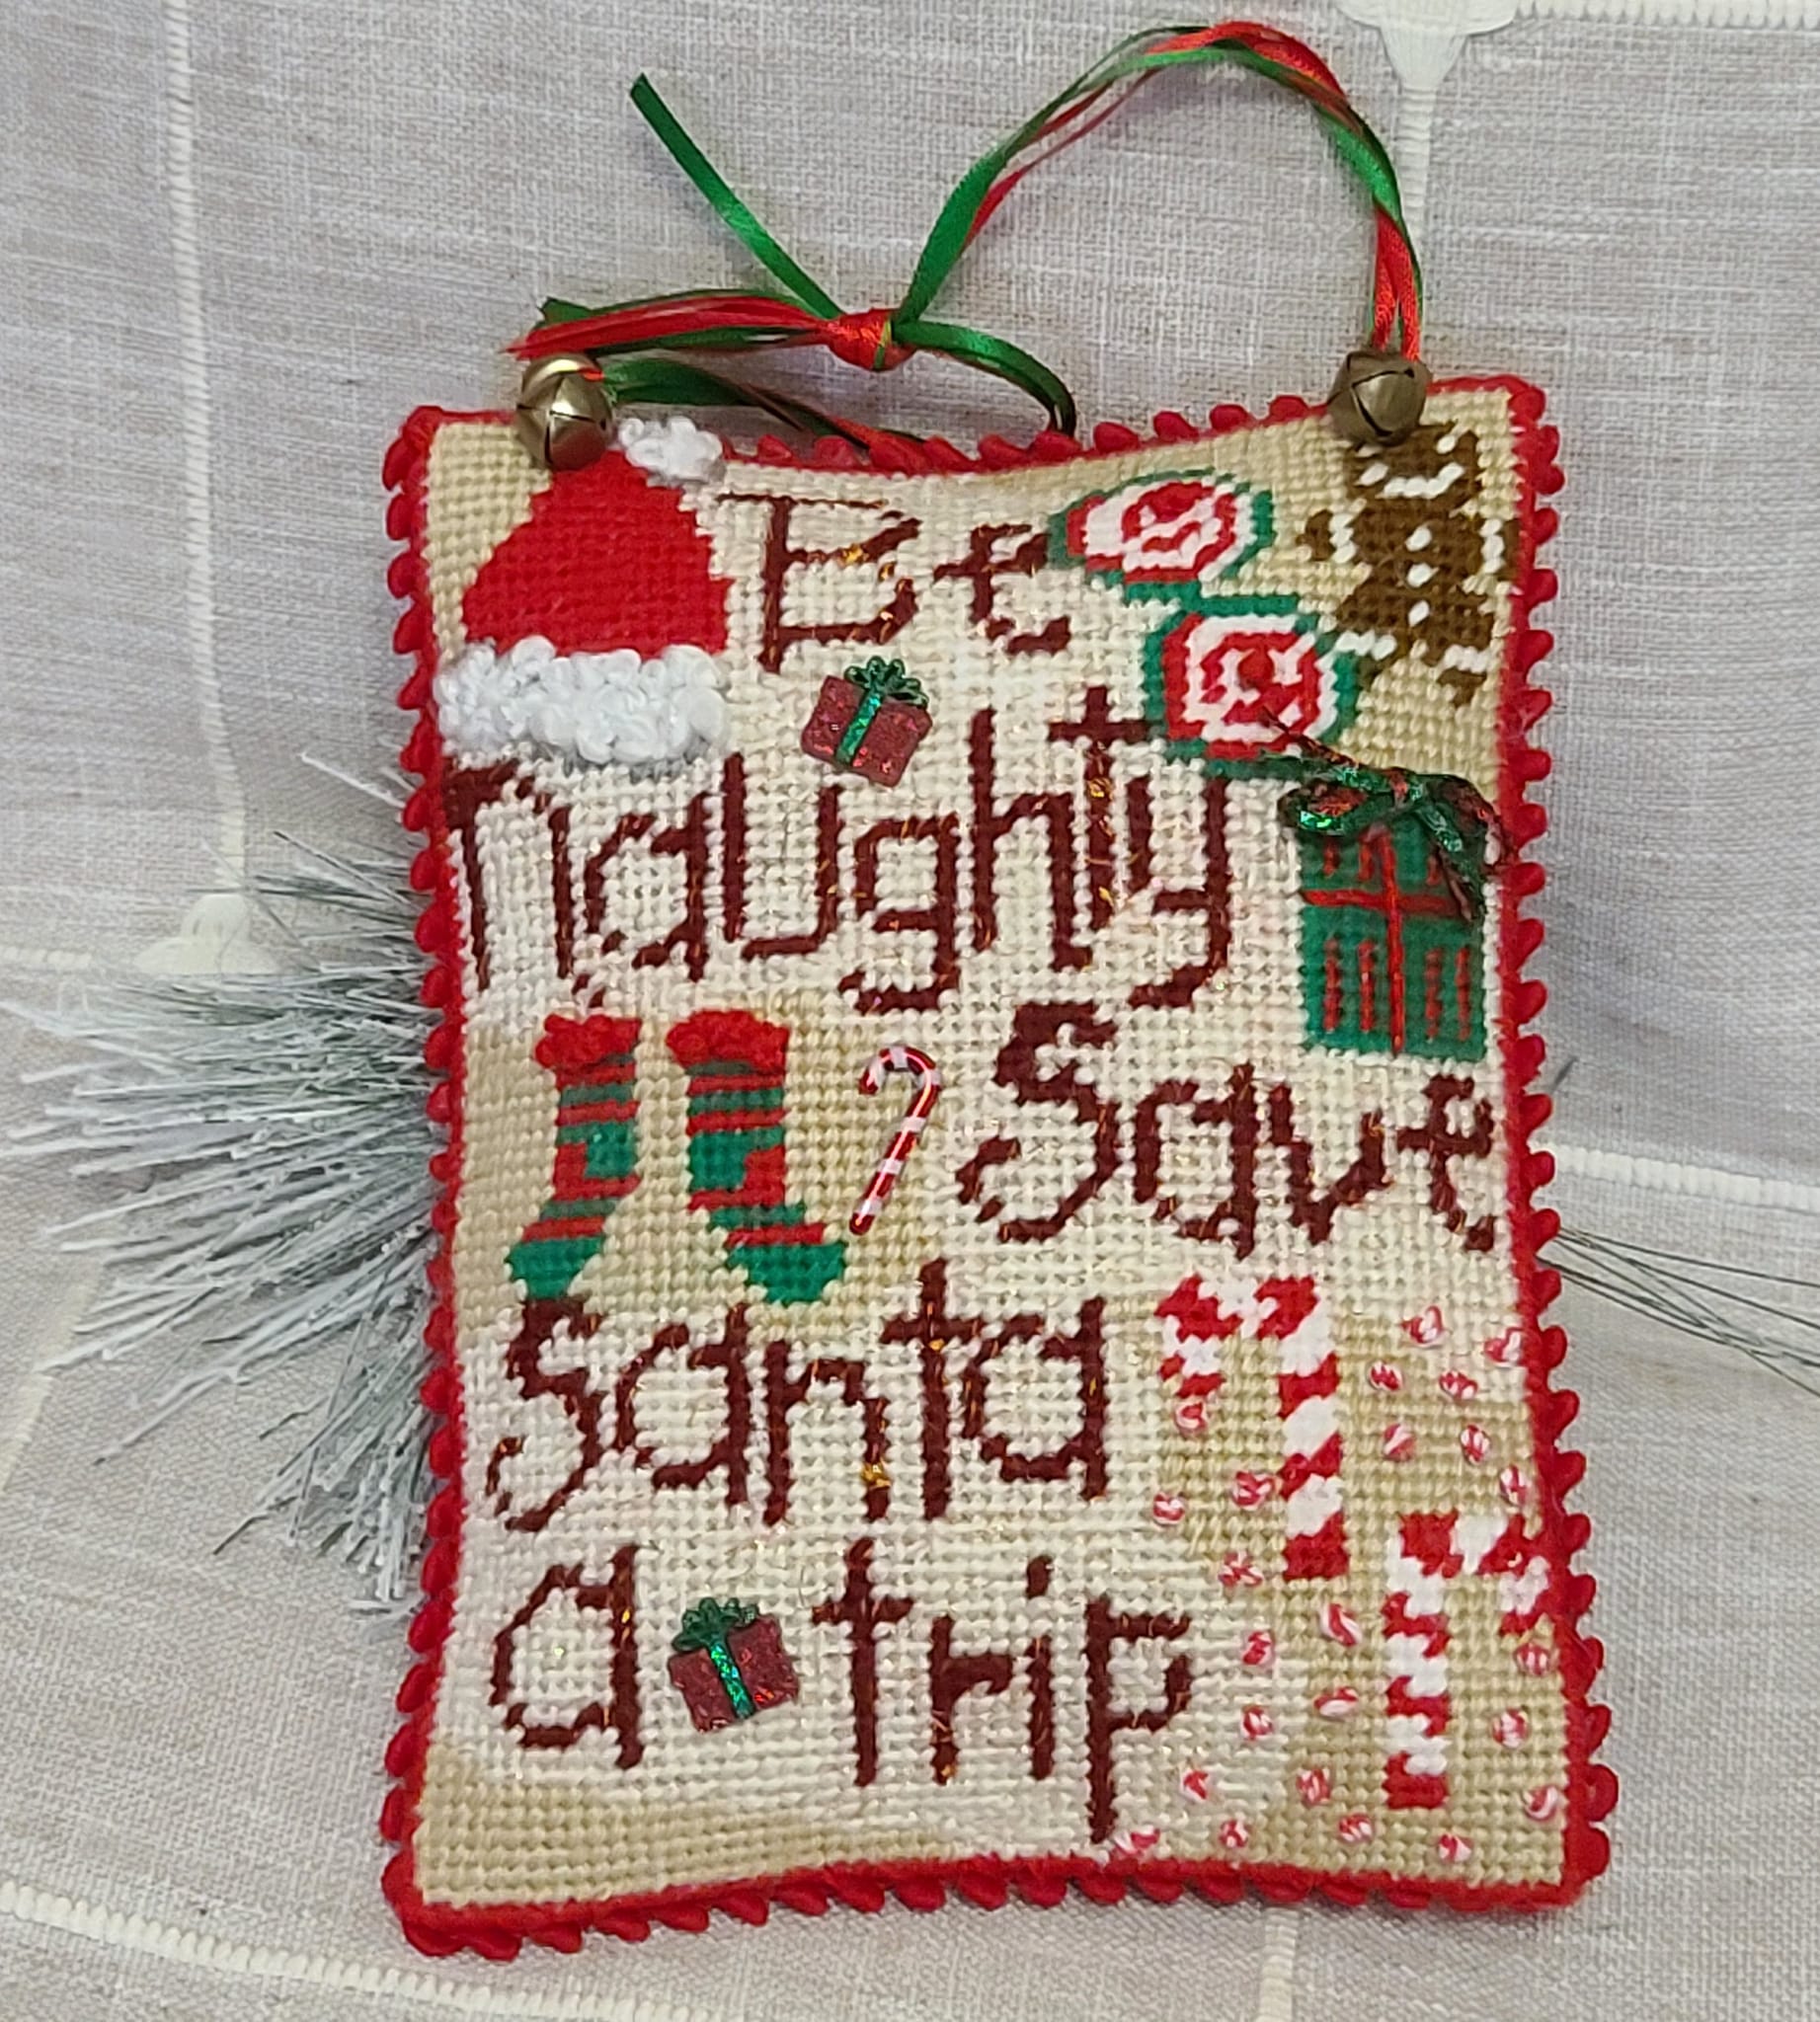 Needlepoint Save Santa a trip with embellisments, door hanger - Click Image to Close